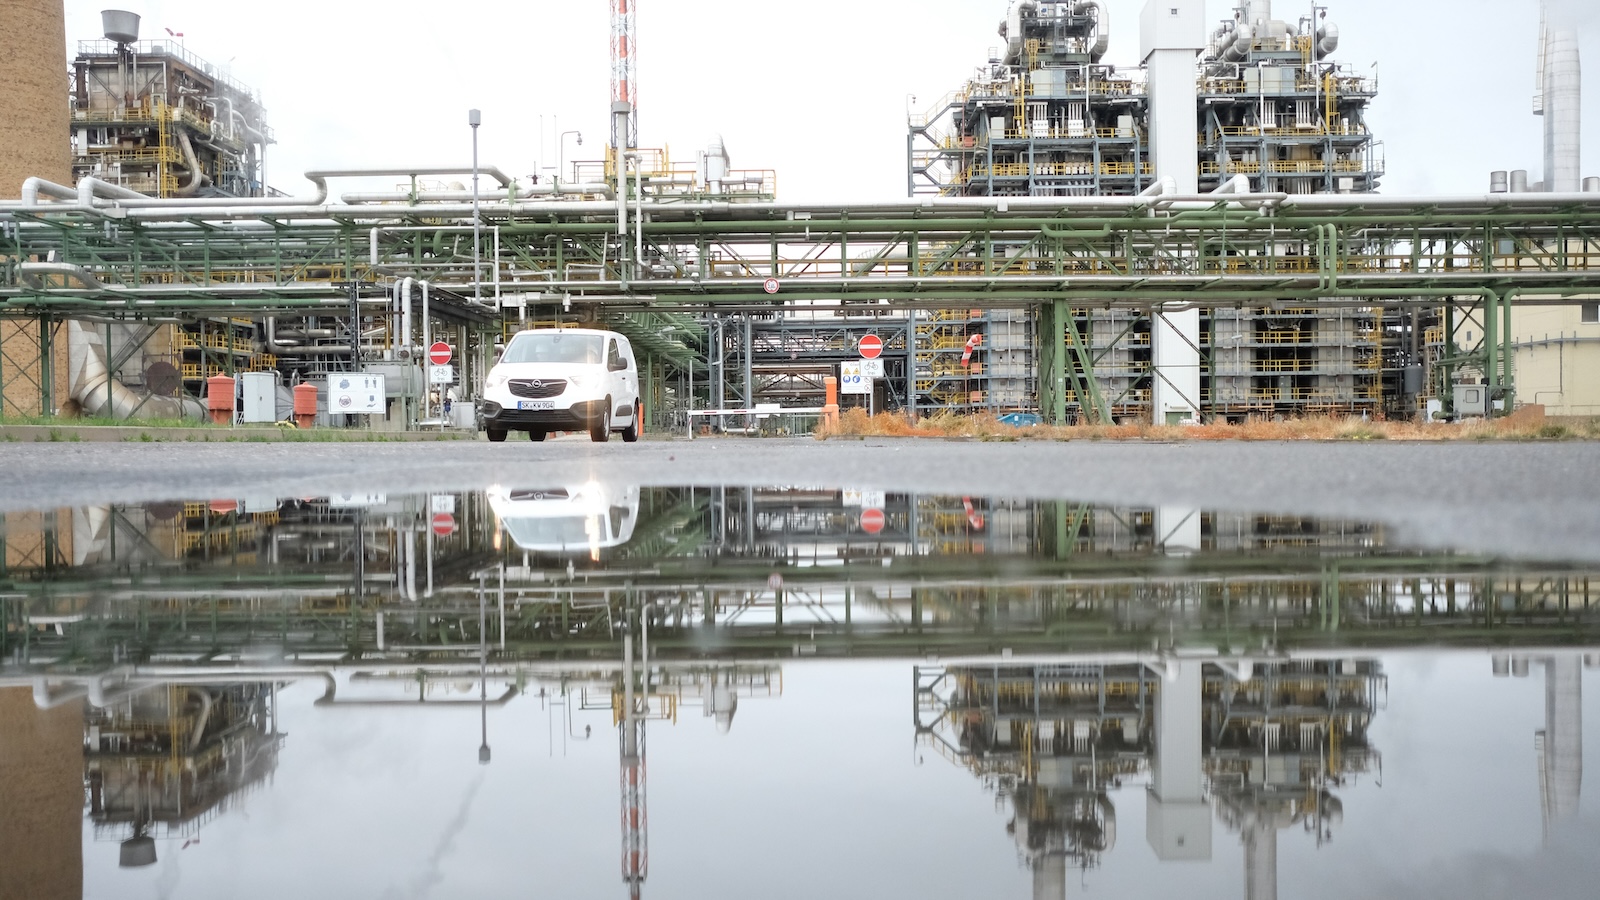 Large factory with car parked outside, and water in foreground